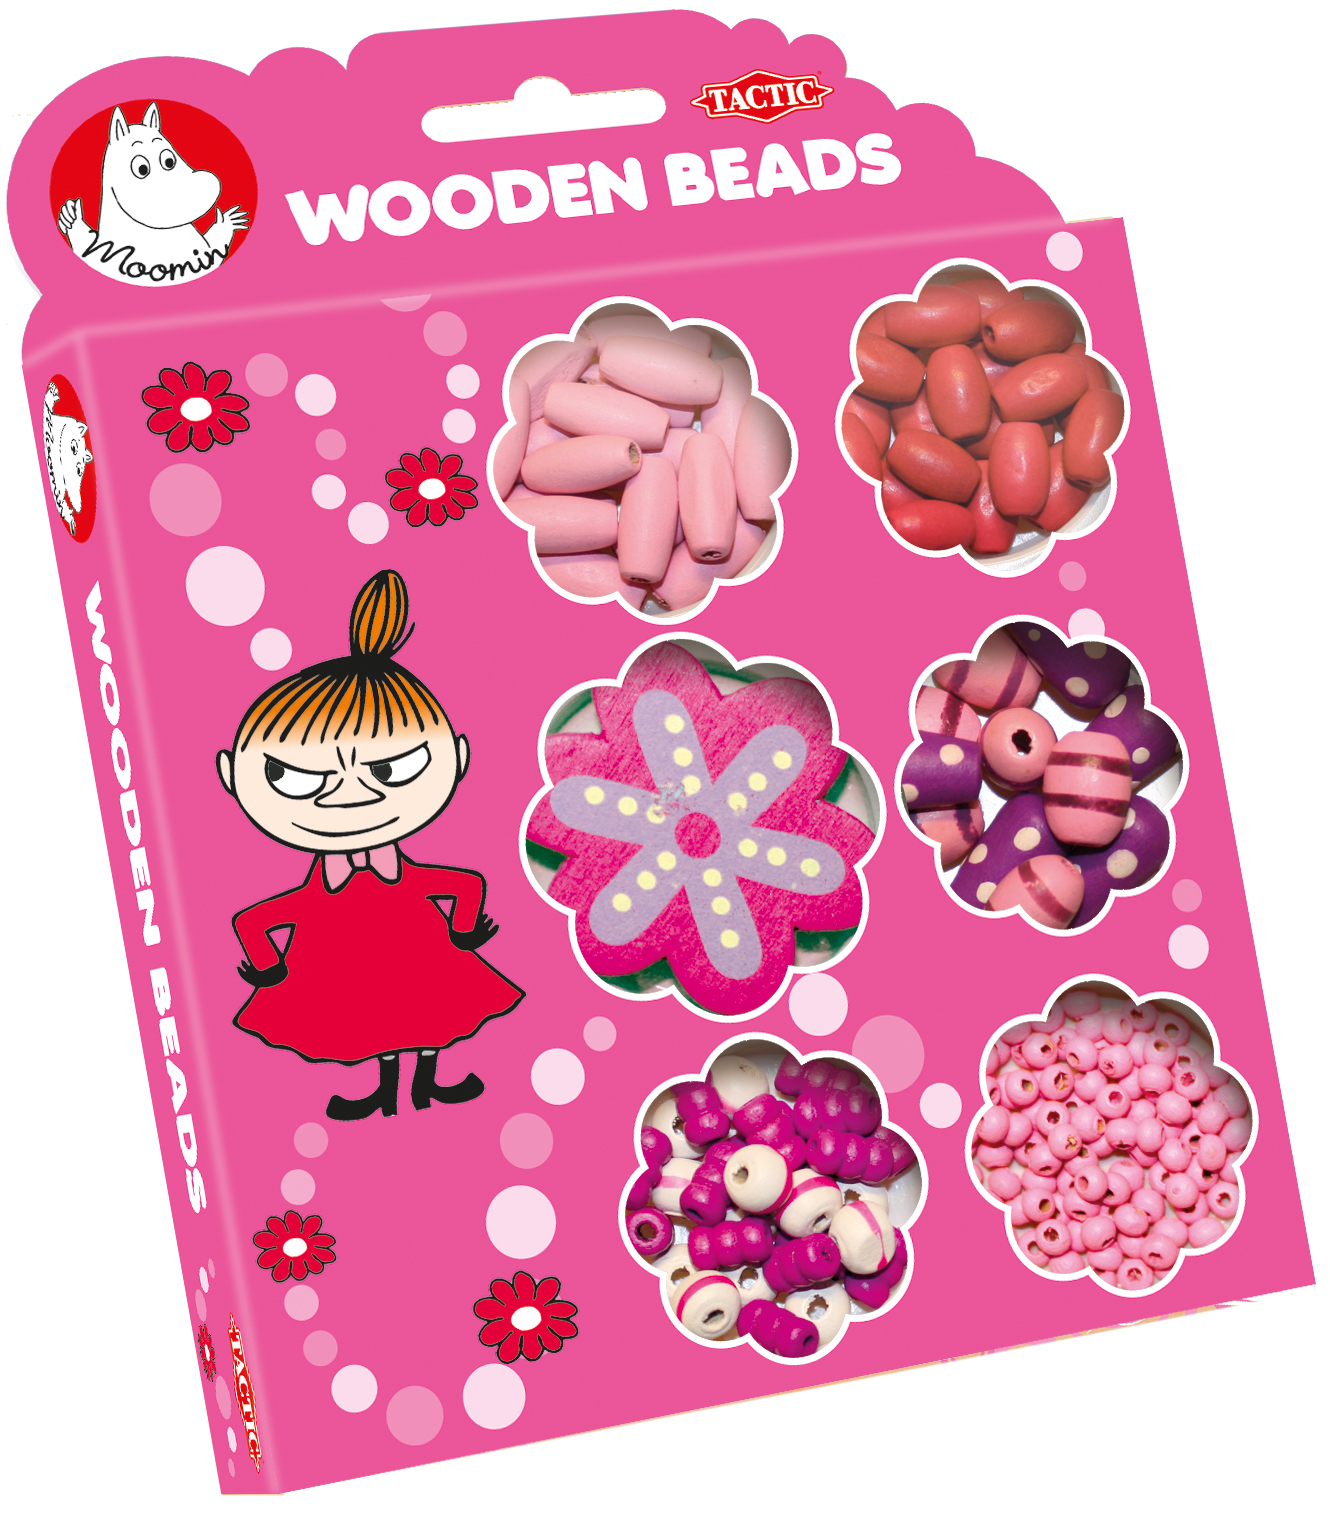 Tactic Moomin wooden beads pink